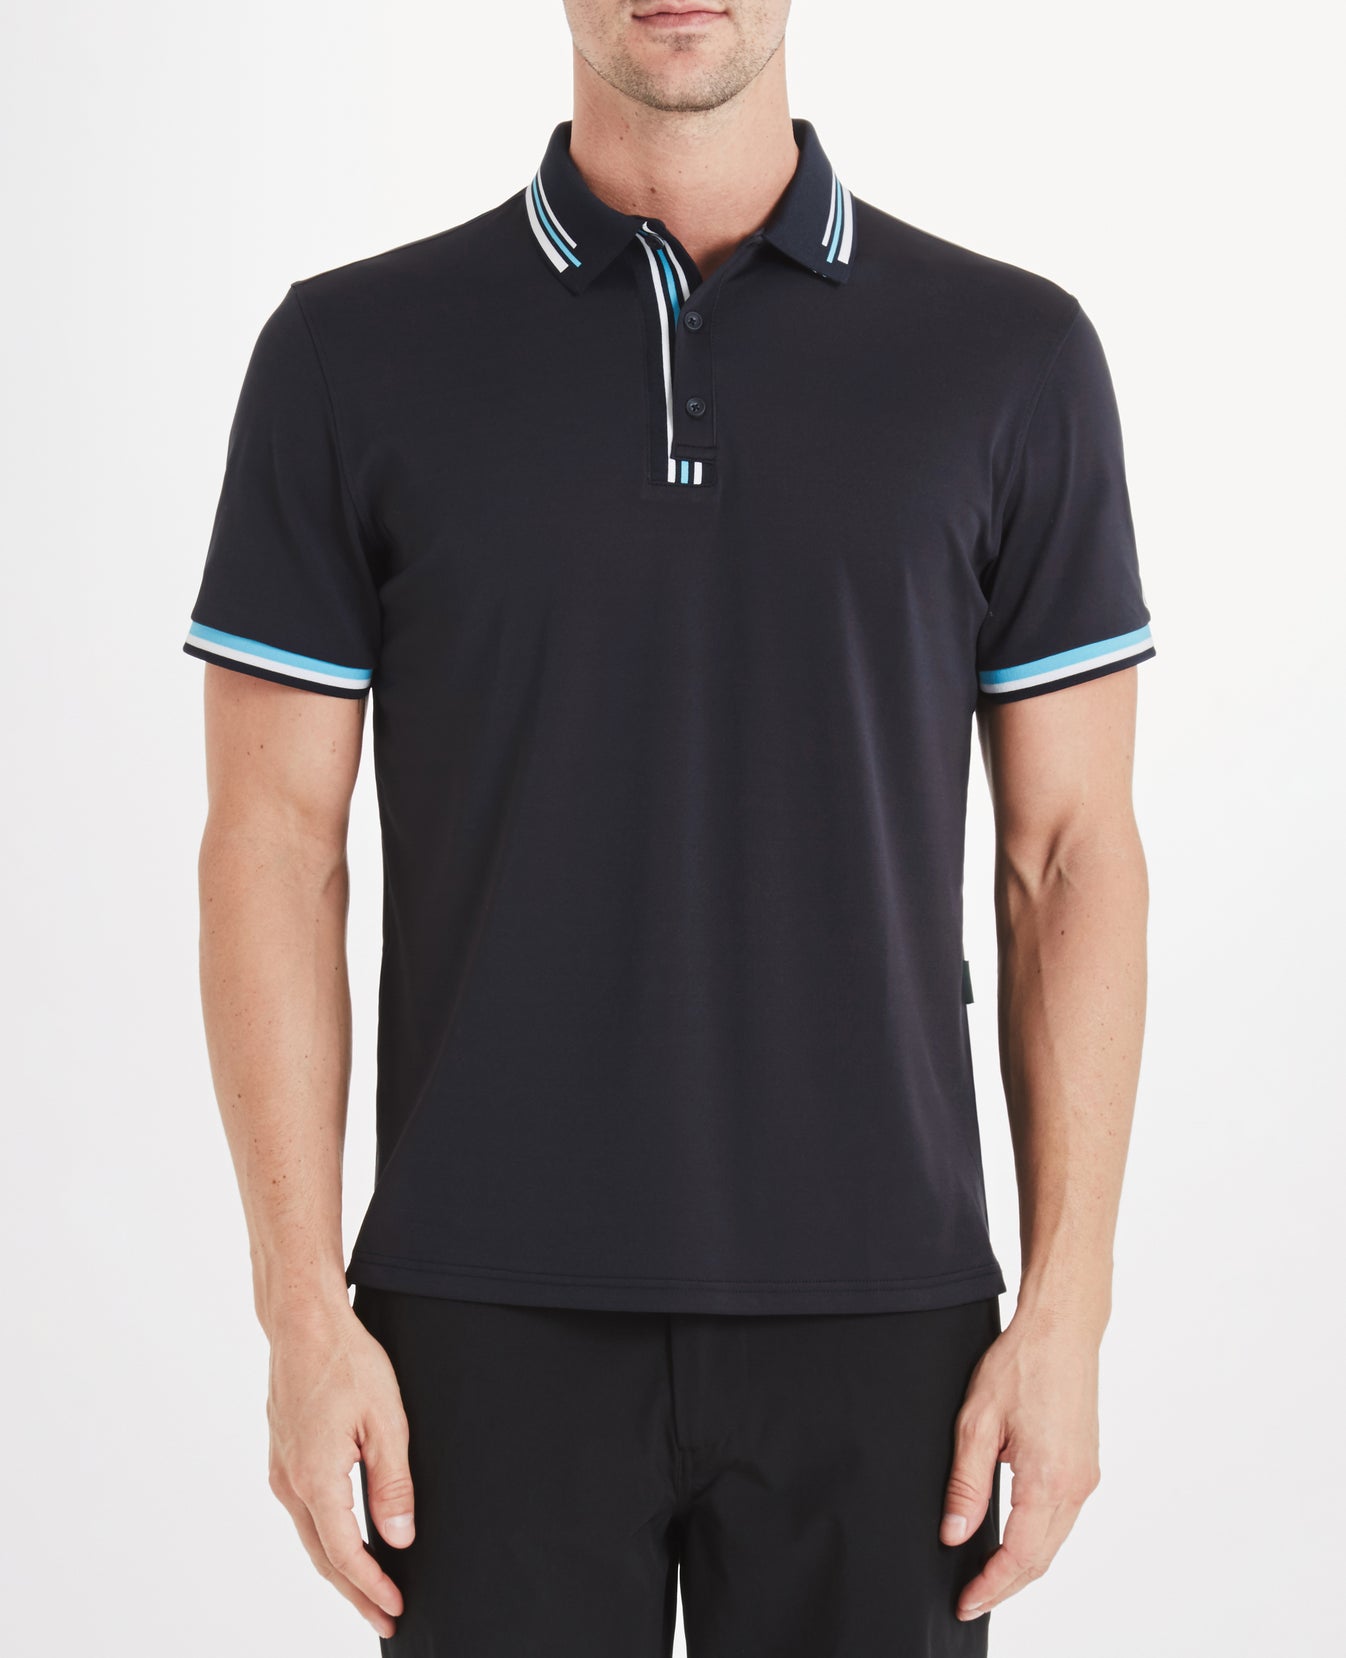 The Overland Polo Naval Blue Mens Top Photo 1